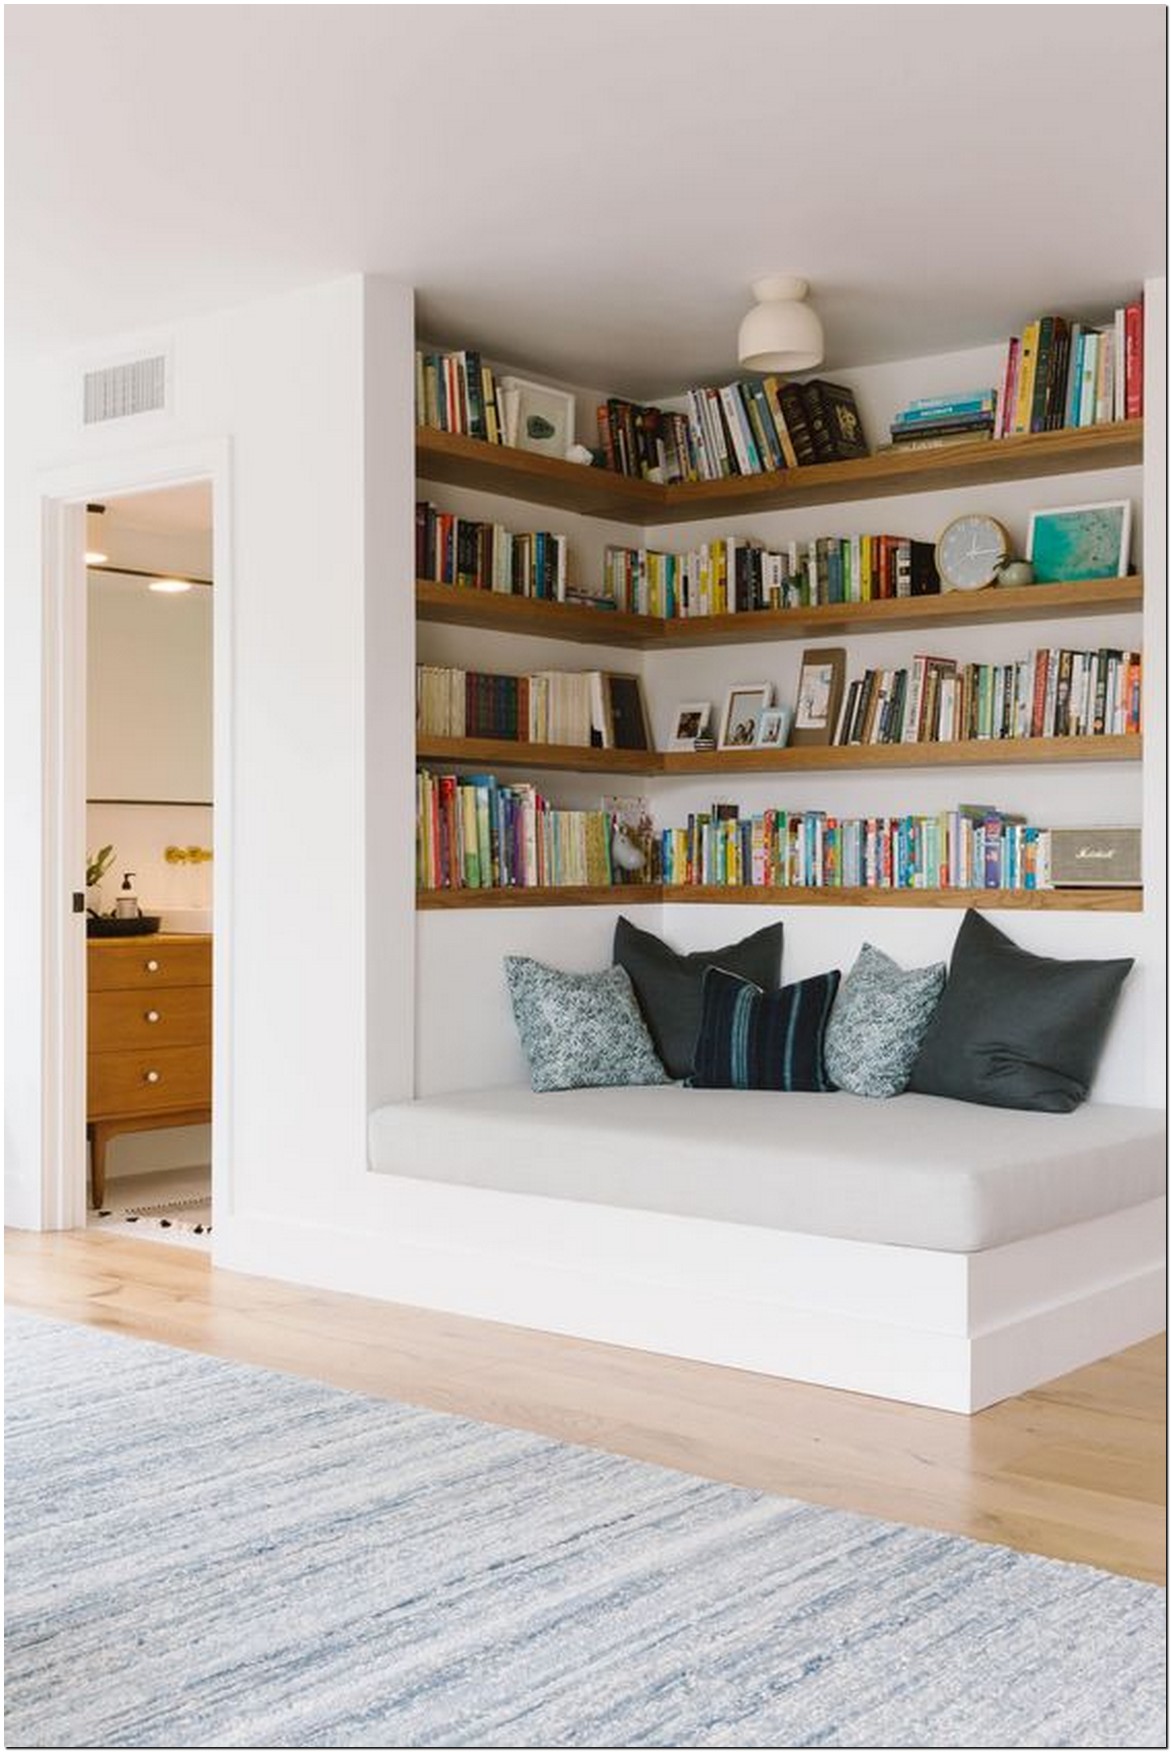 18 great kids reading corners you'll love 18